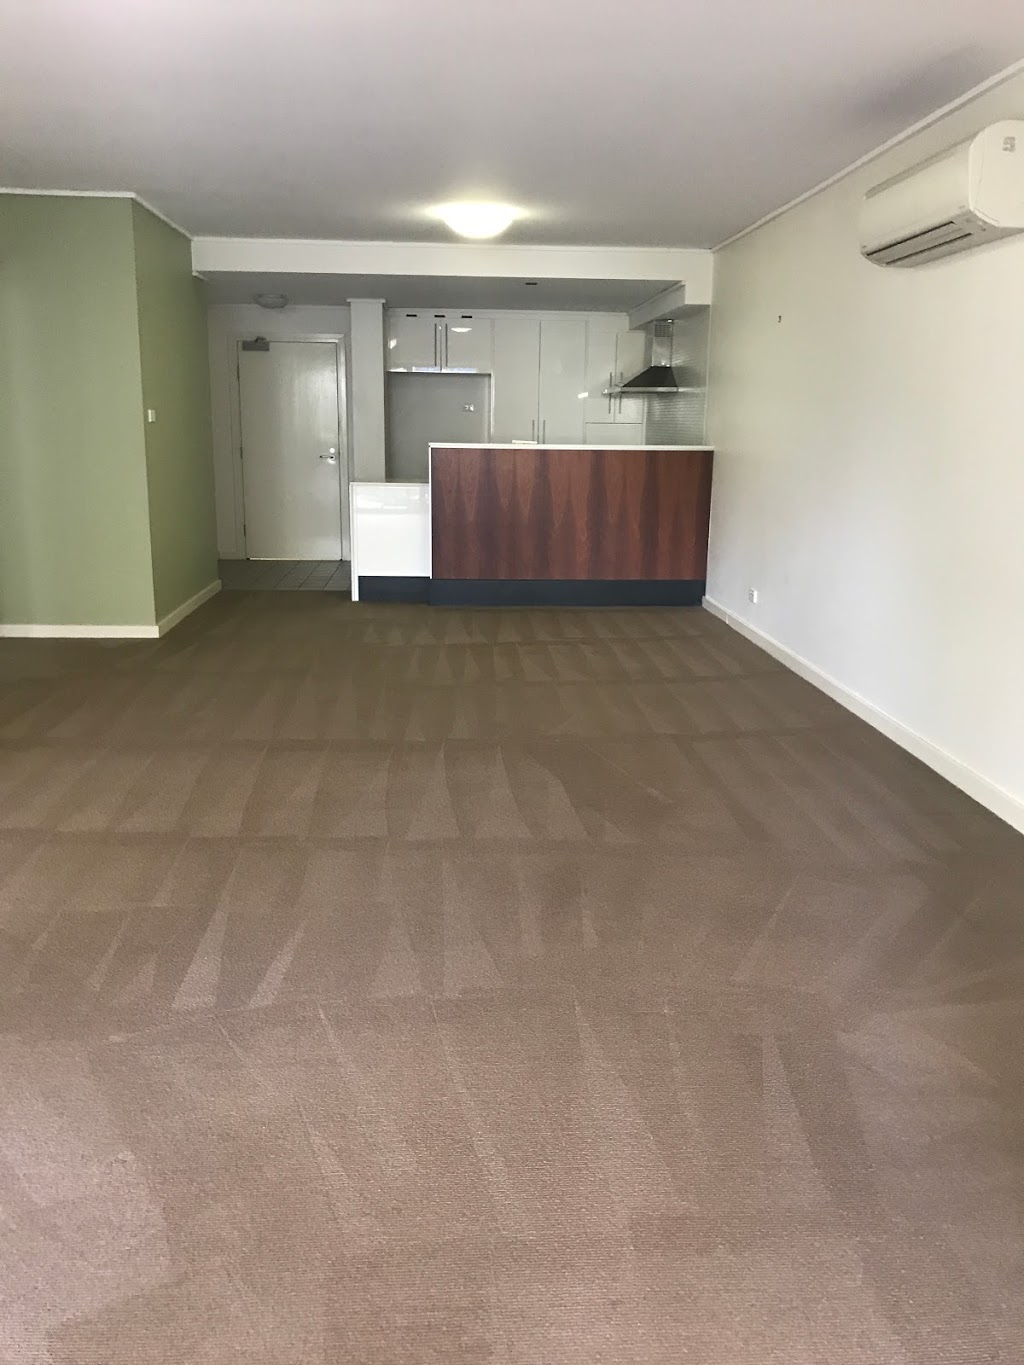 Ultraclean Carpets Tiles and Pest Control | laundry | Walnut Cl, Hamlyn Terrace NSW 2259, Australia | 0432209751 OR +61 432 209 751